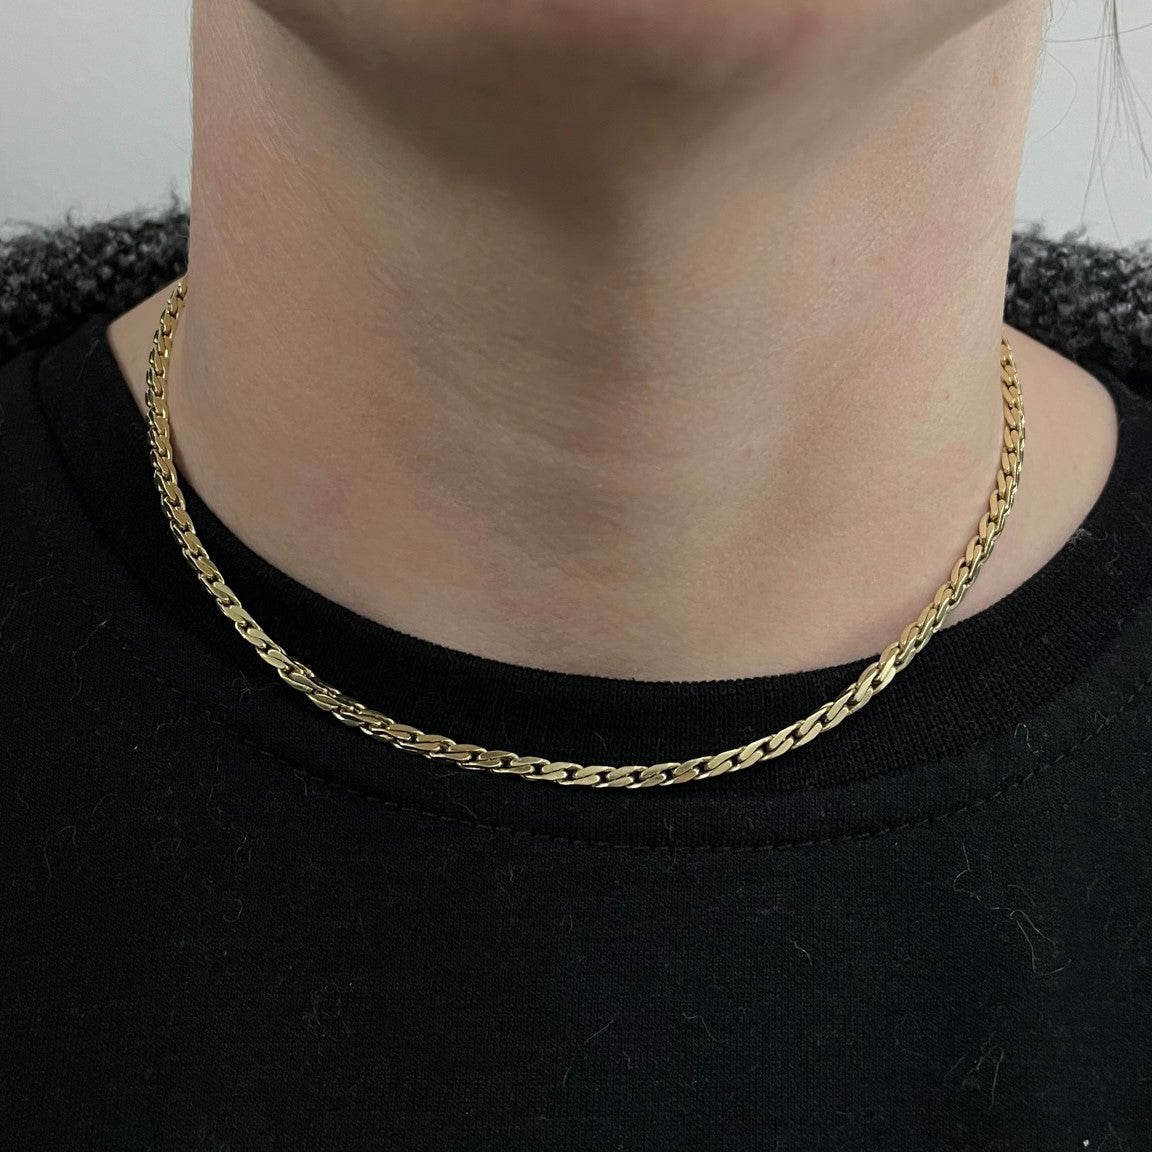 10k Yellow Gold Elongated Curb Chain | 14